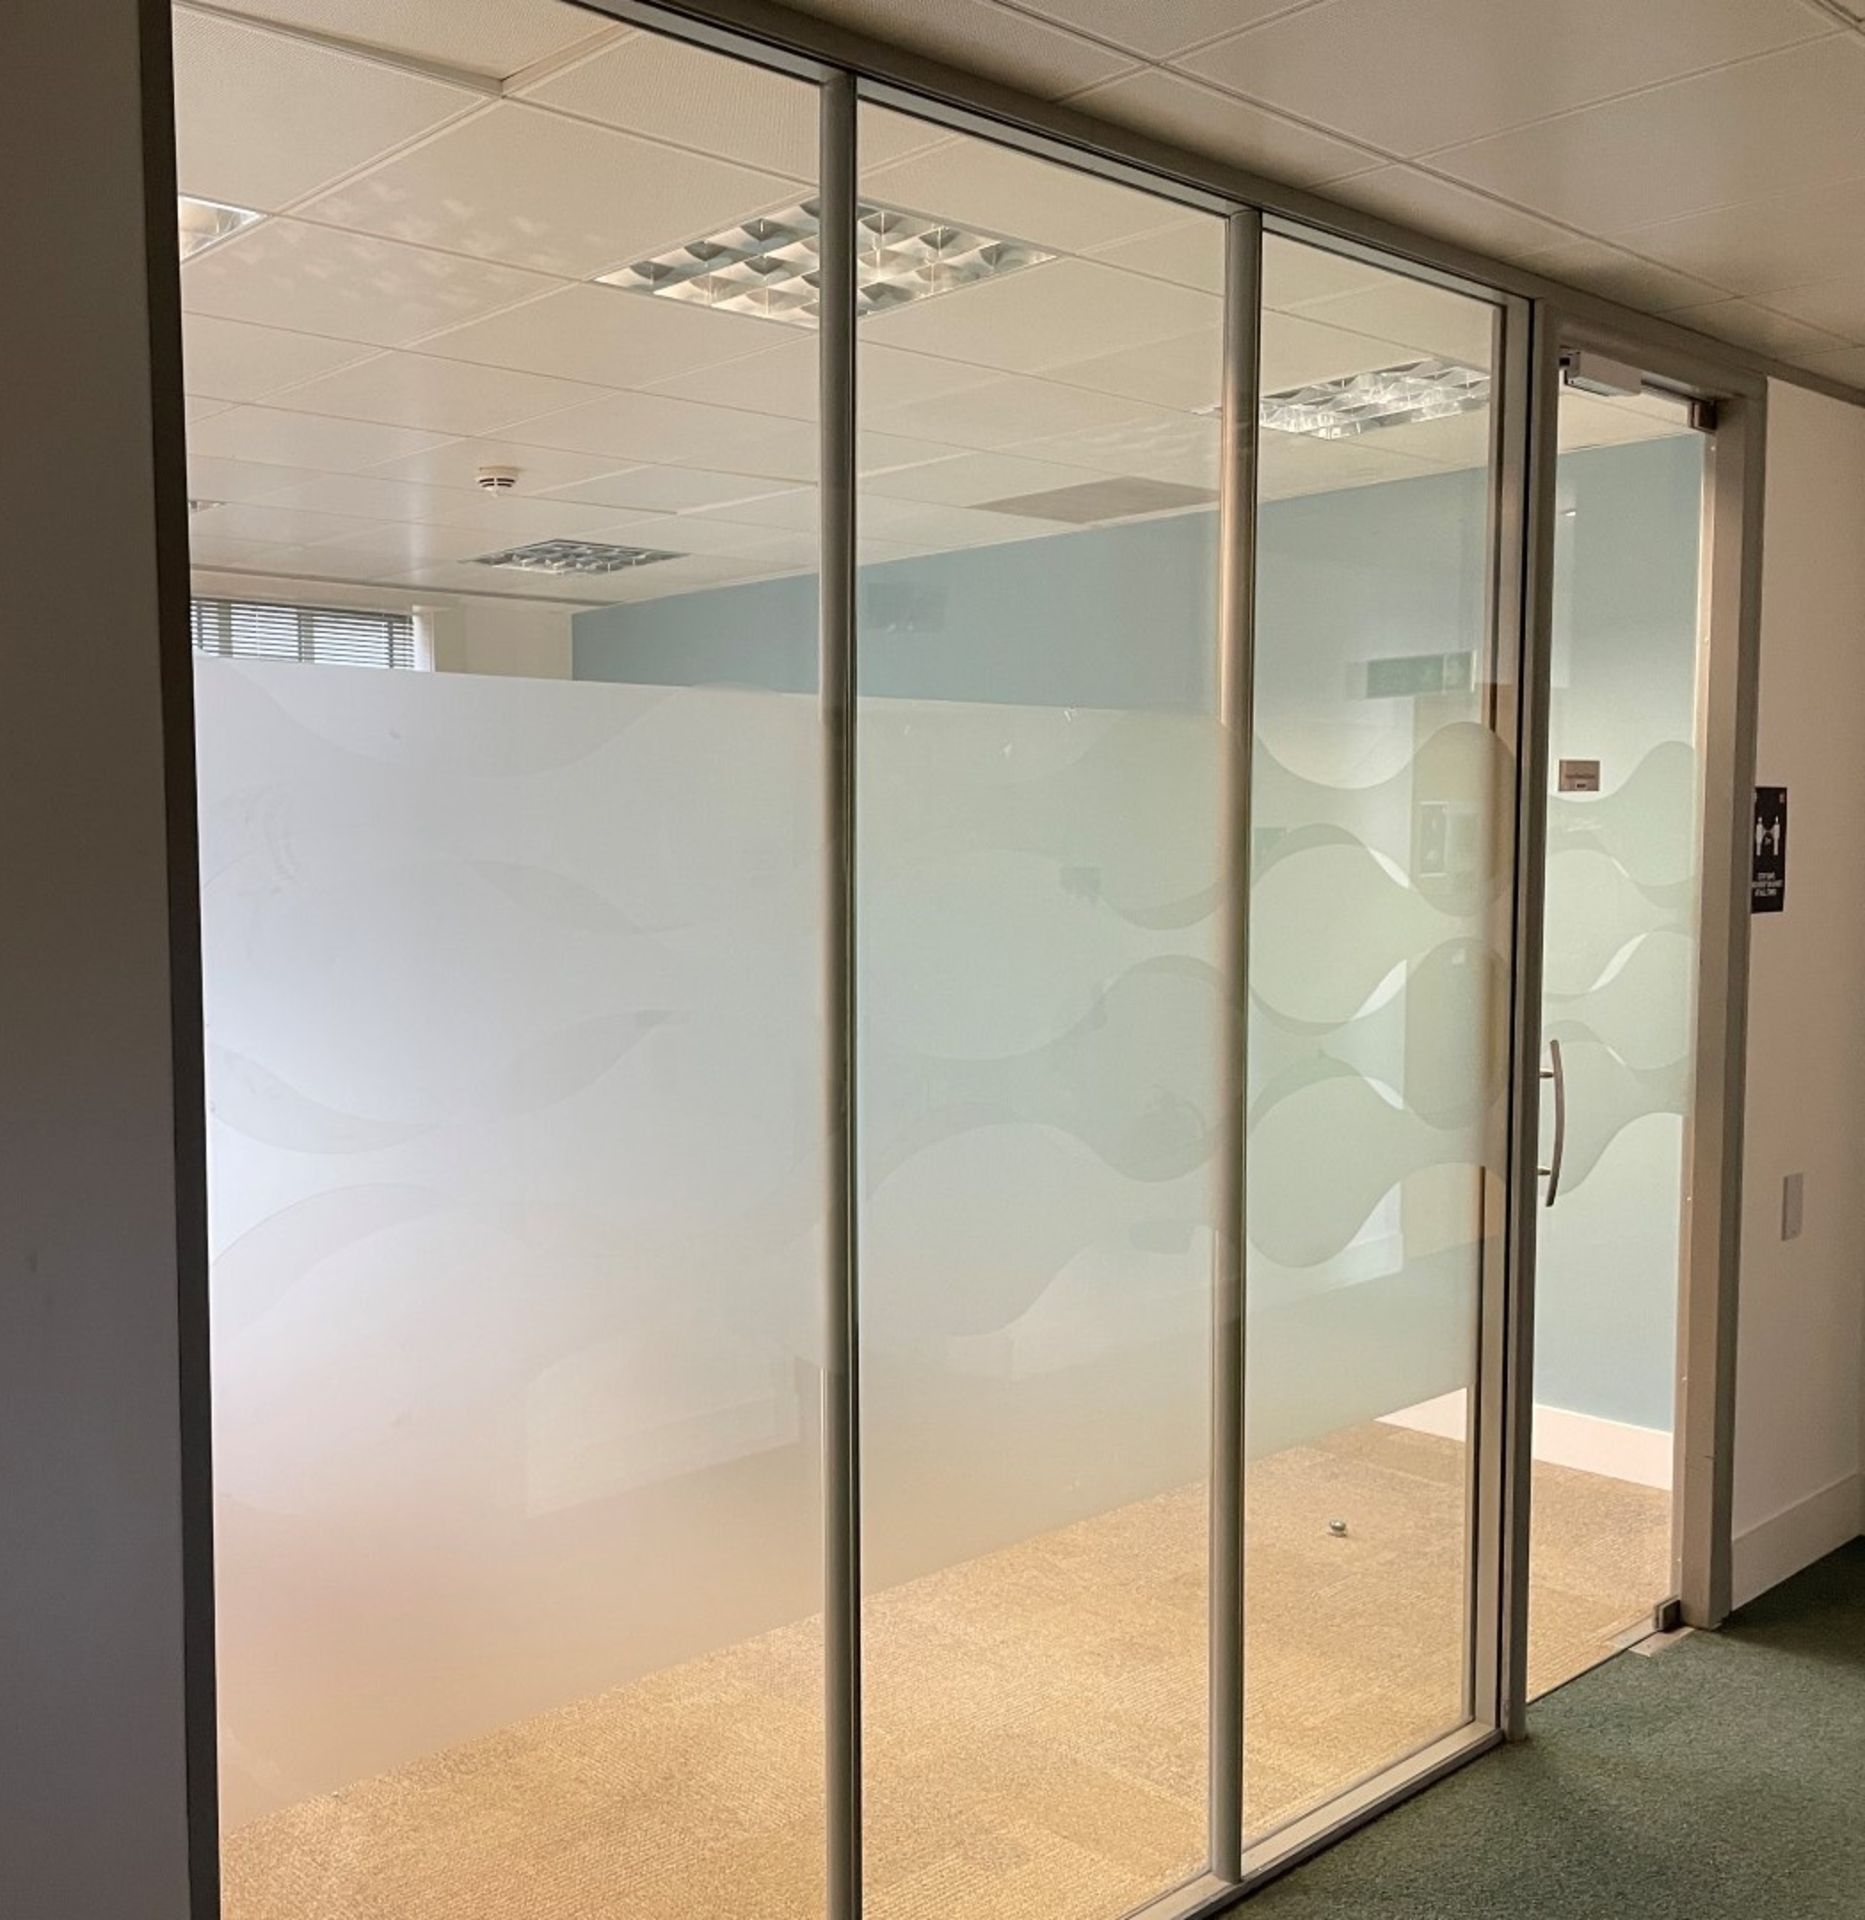 3 x Glass Office Partition Panels, And 1 x Glass Door With Release Button - Currently Covers An Area - Image 2 of 7